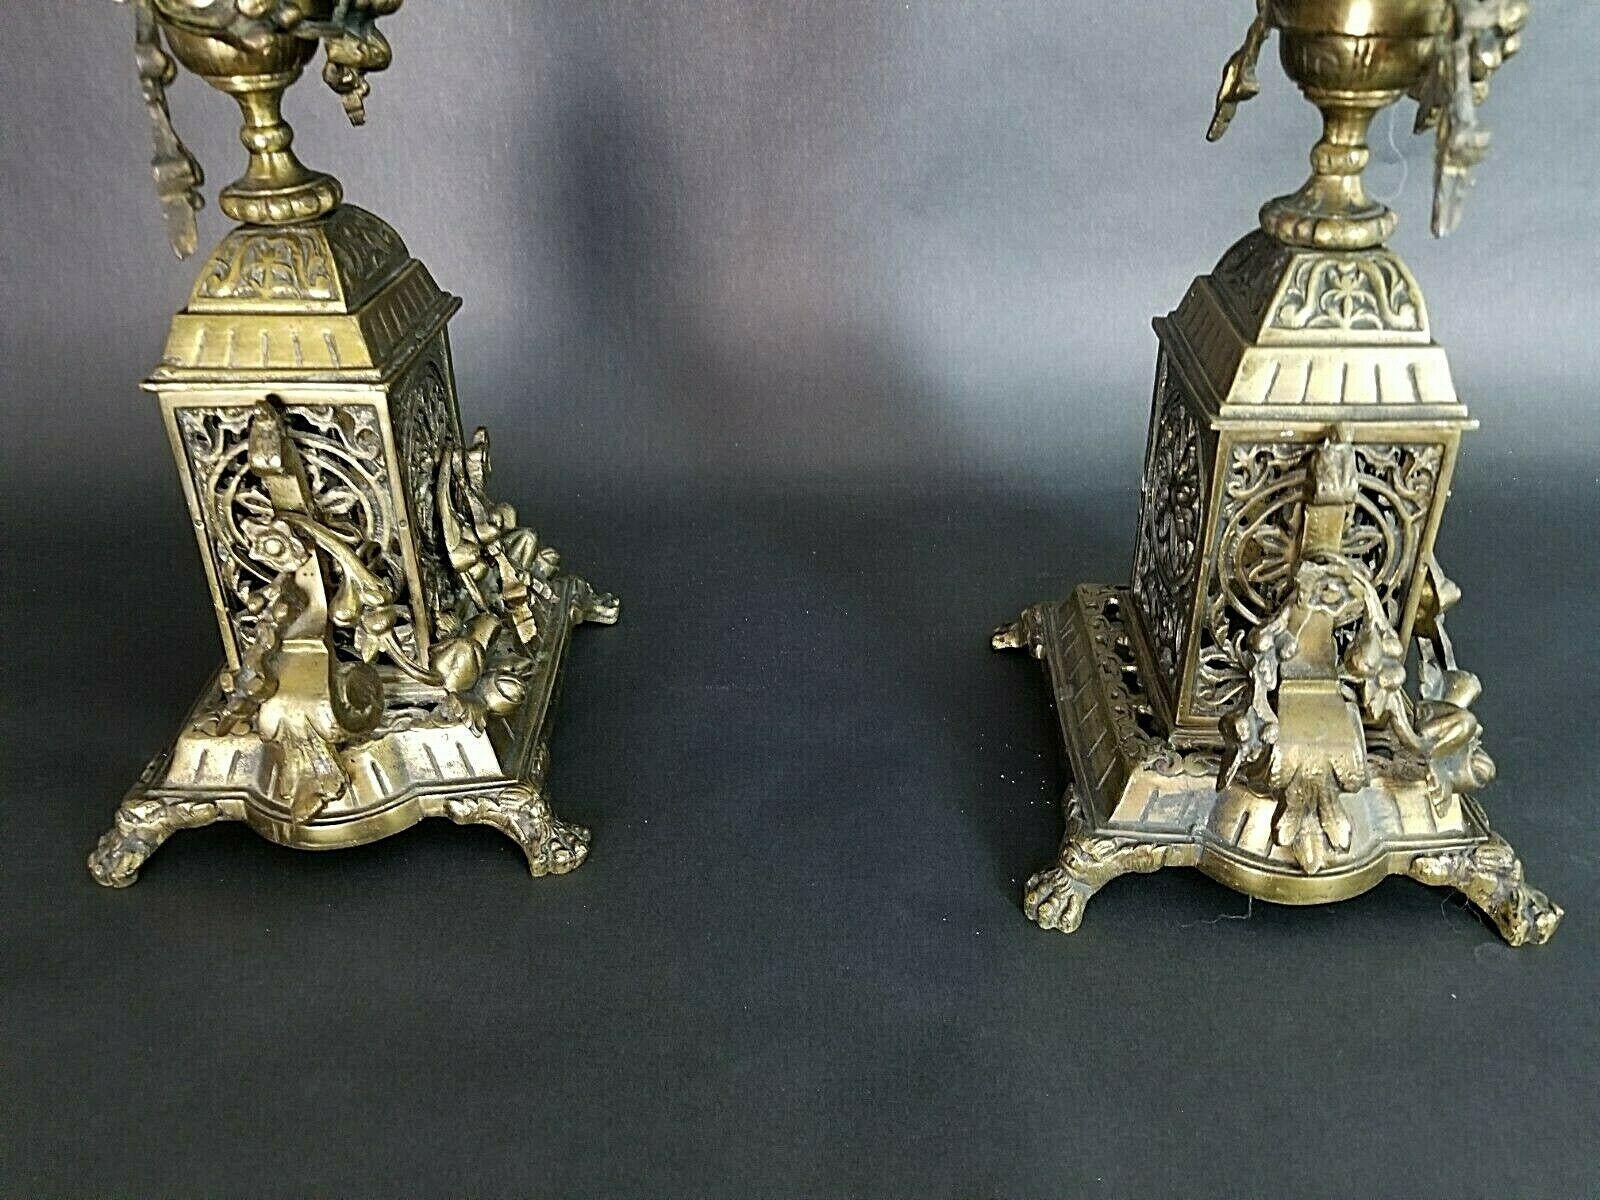 Antique Italian Ornate Bronze French Louis XV Rococo 6 Point Candelabras For Sale 2